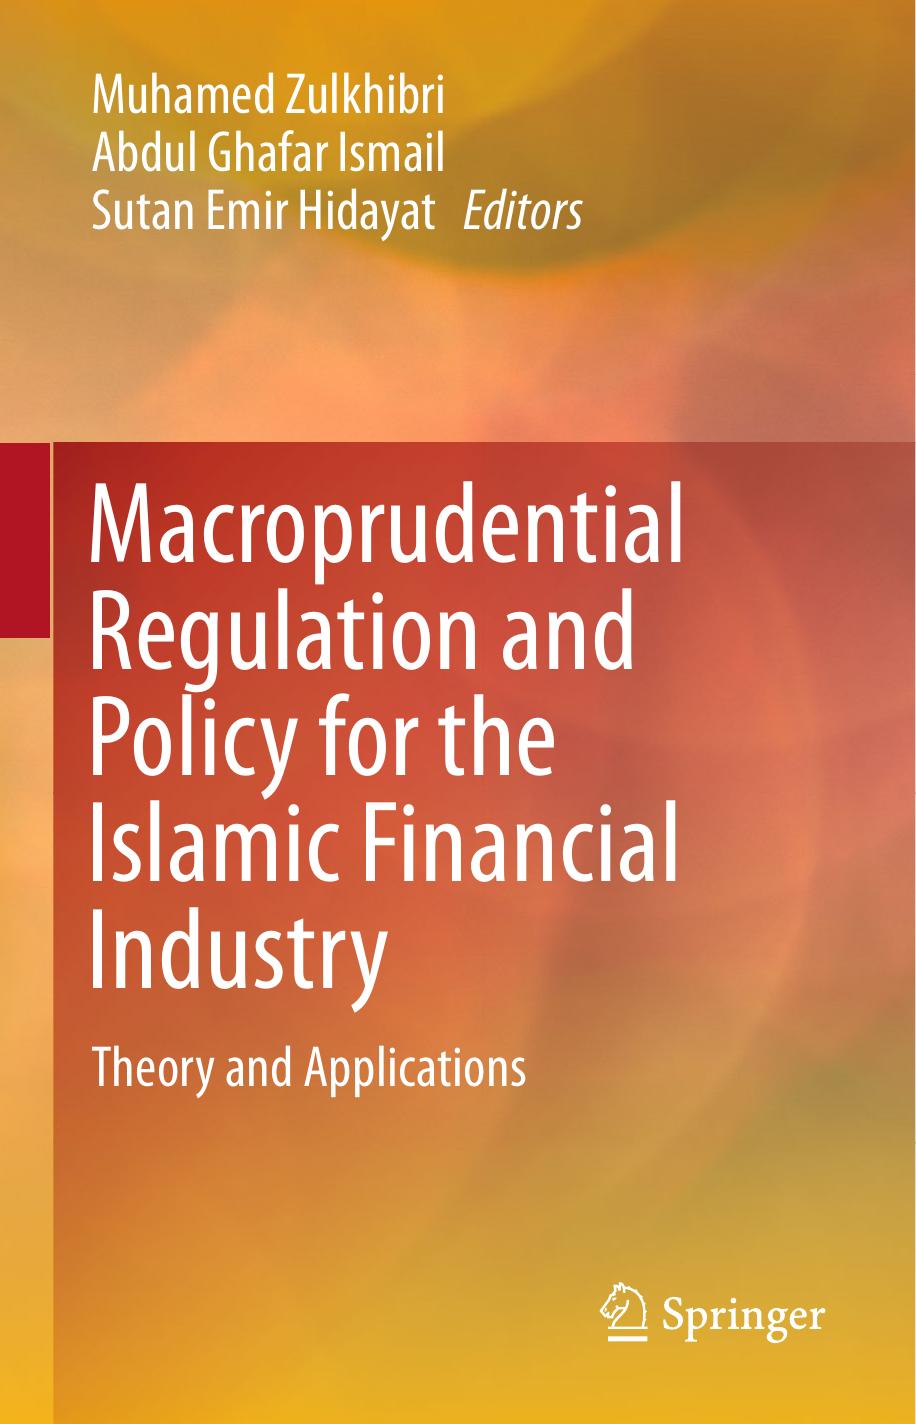 Macroprudential Regulation and Policy for the Islamic Financial Industry 2016.pdf